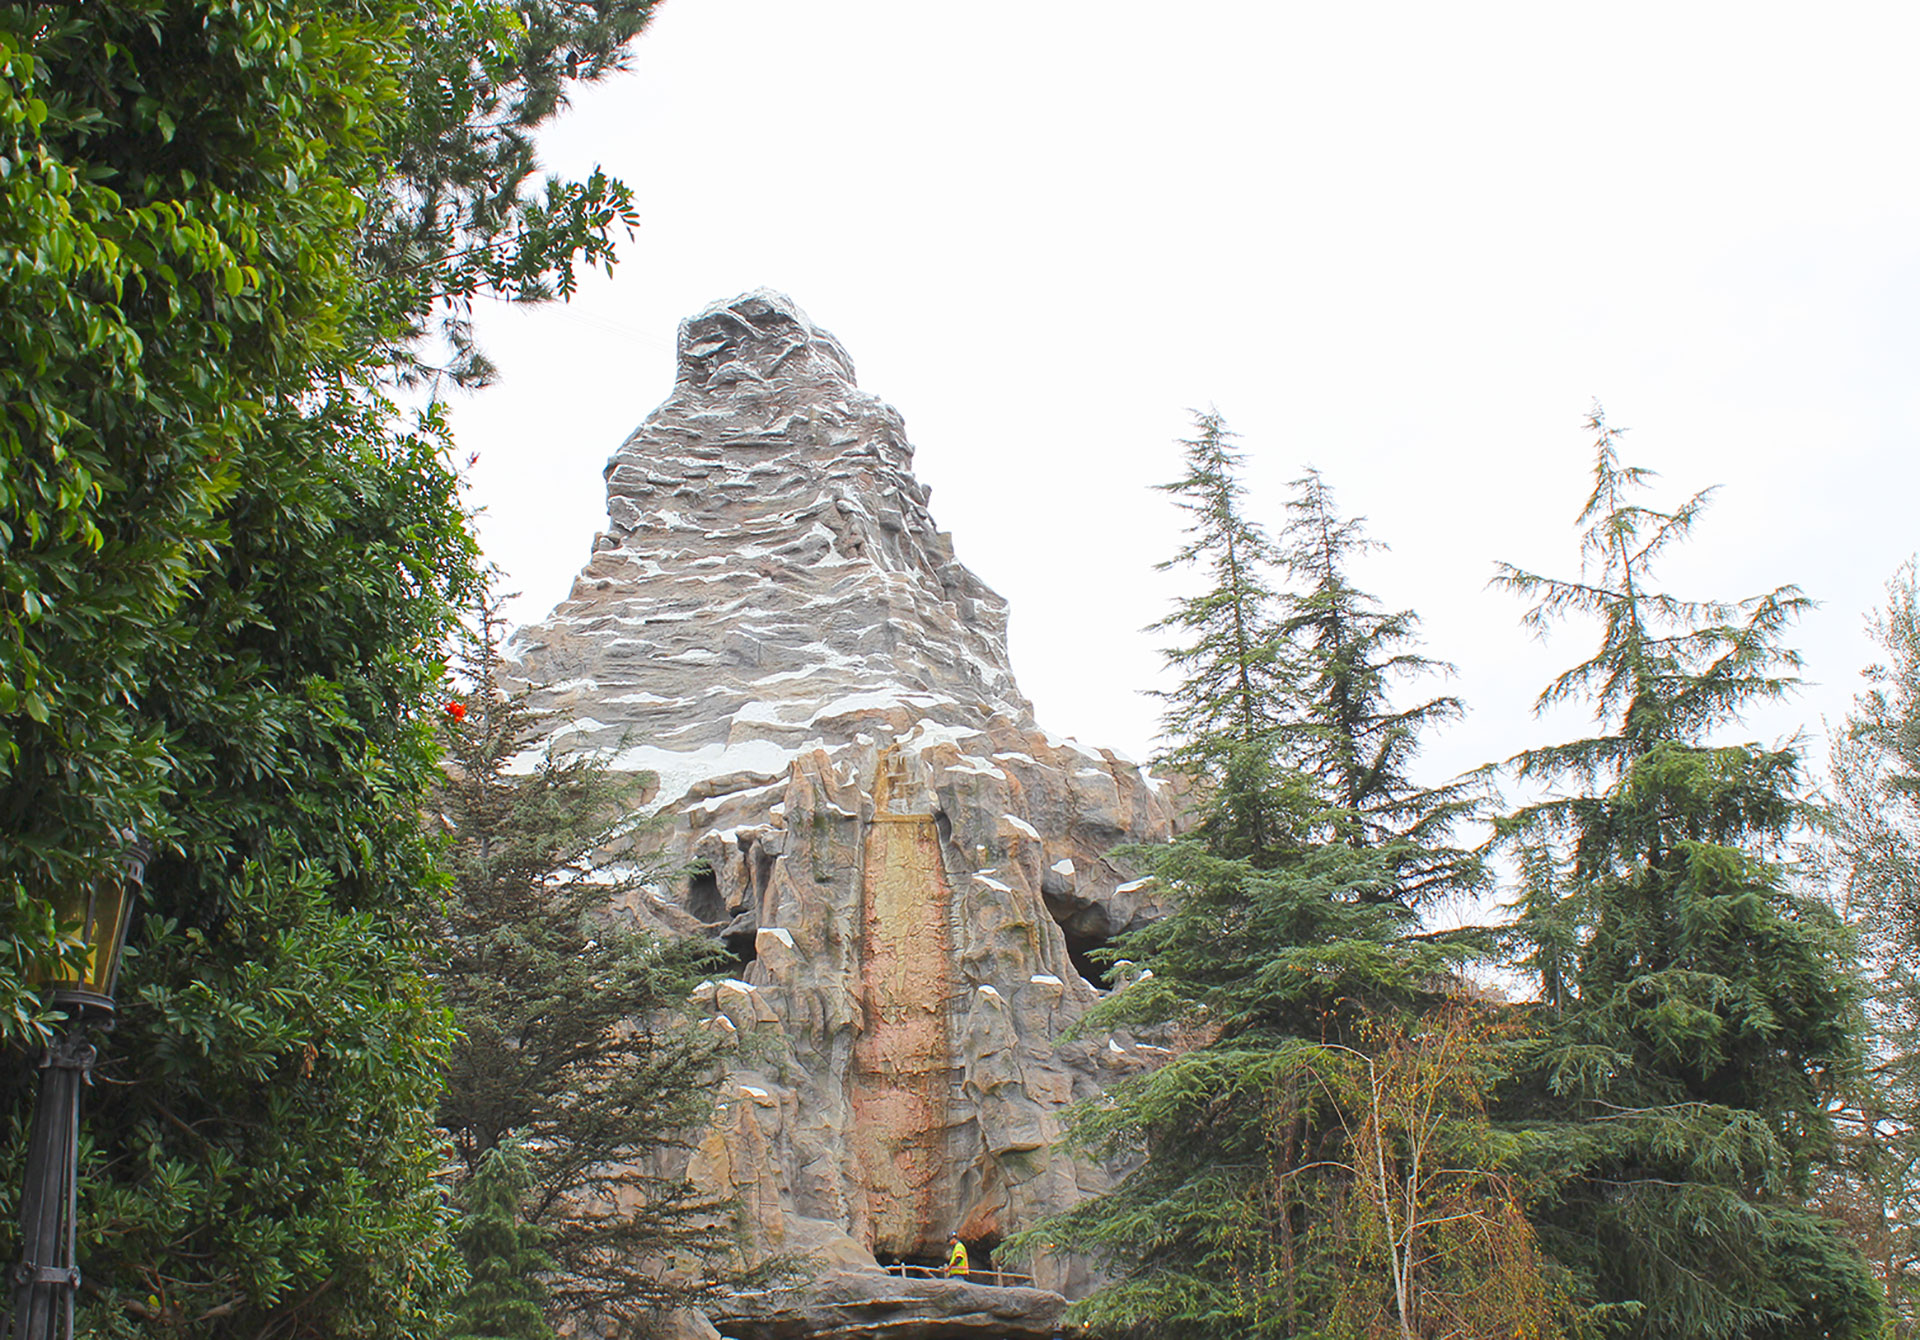 Iconic Matterhorn mountain undergoes construction during the slow time of the year for Disneyland. It has not yet been release what the end result will be, but guests can definitely expect an update to this rollercoaster-like ride.